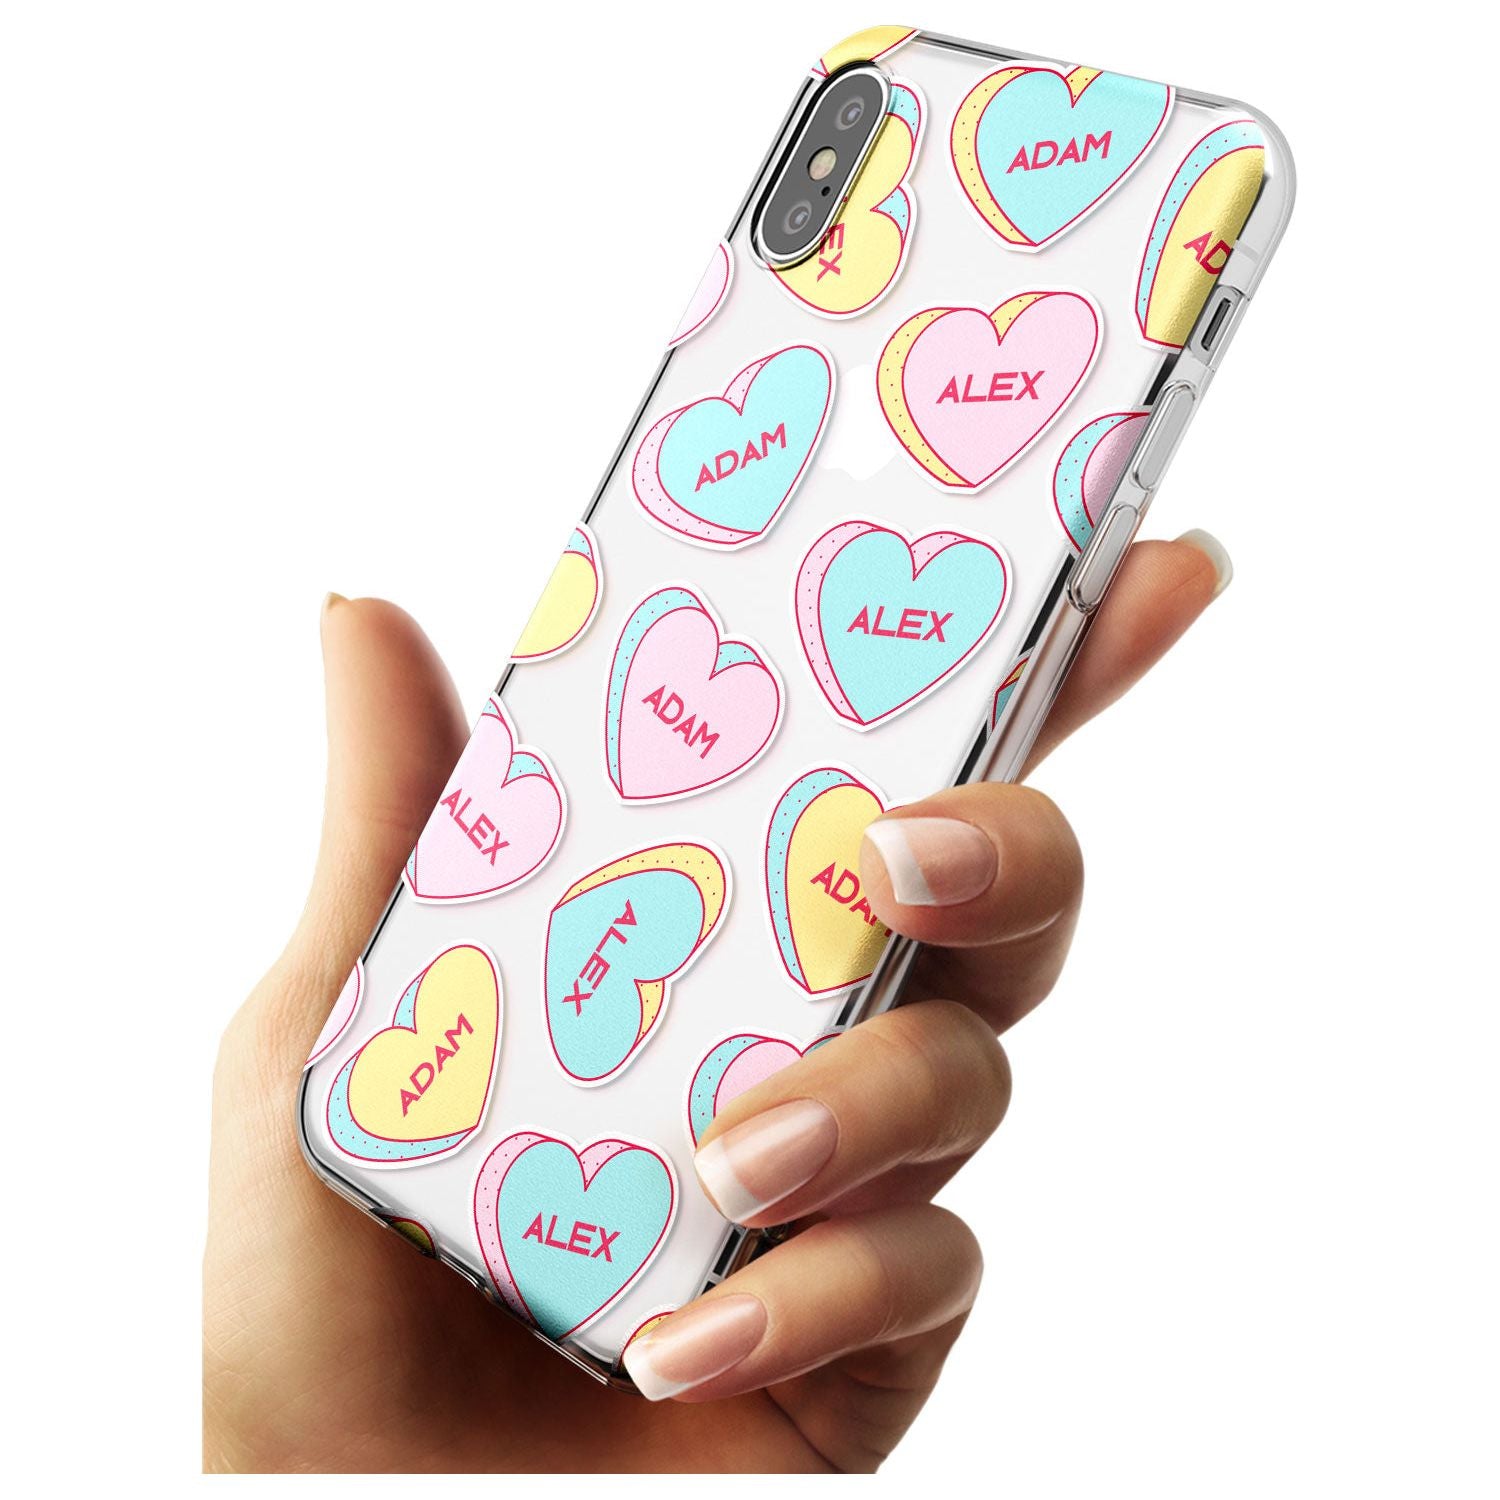 Custom Text Love Hearts Black Impact Phone Case for iPhone X XS Max XR